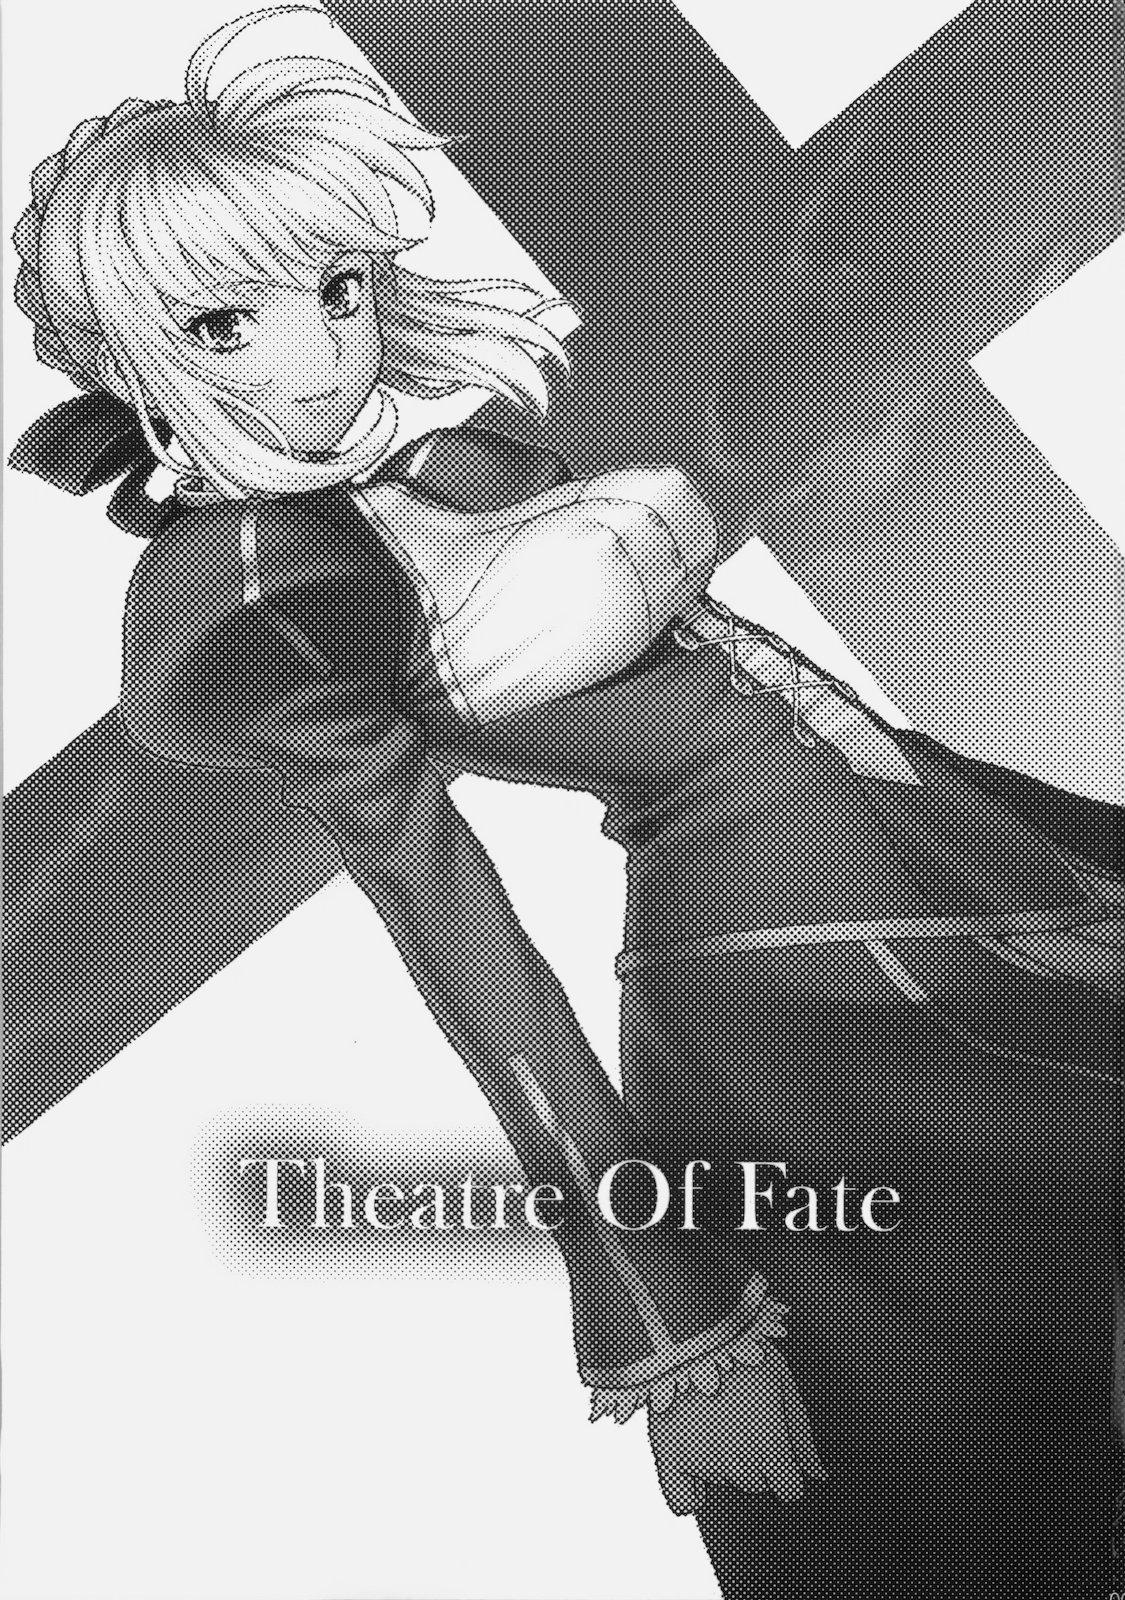 Theater of Fate 1